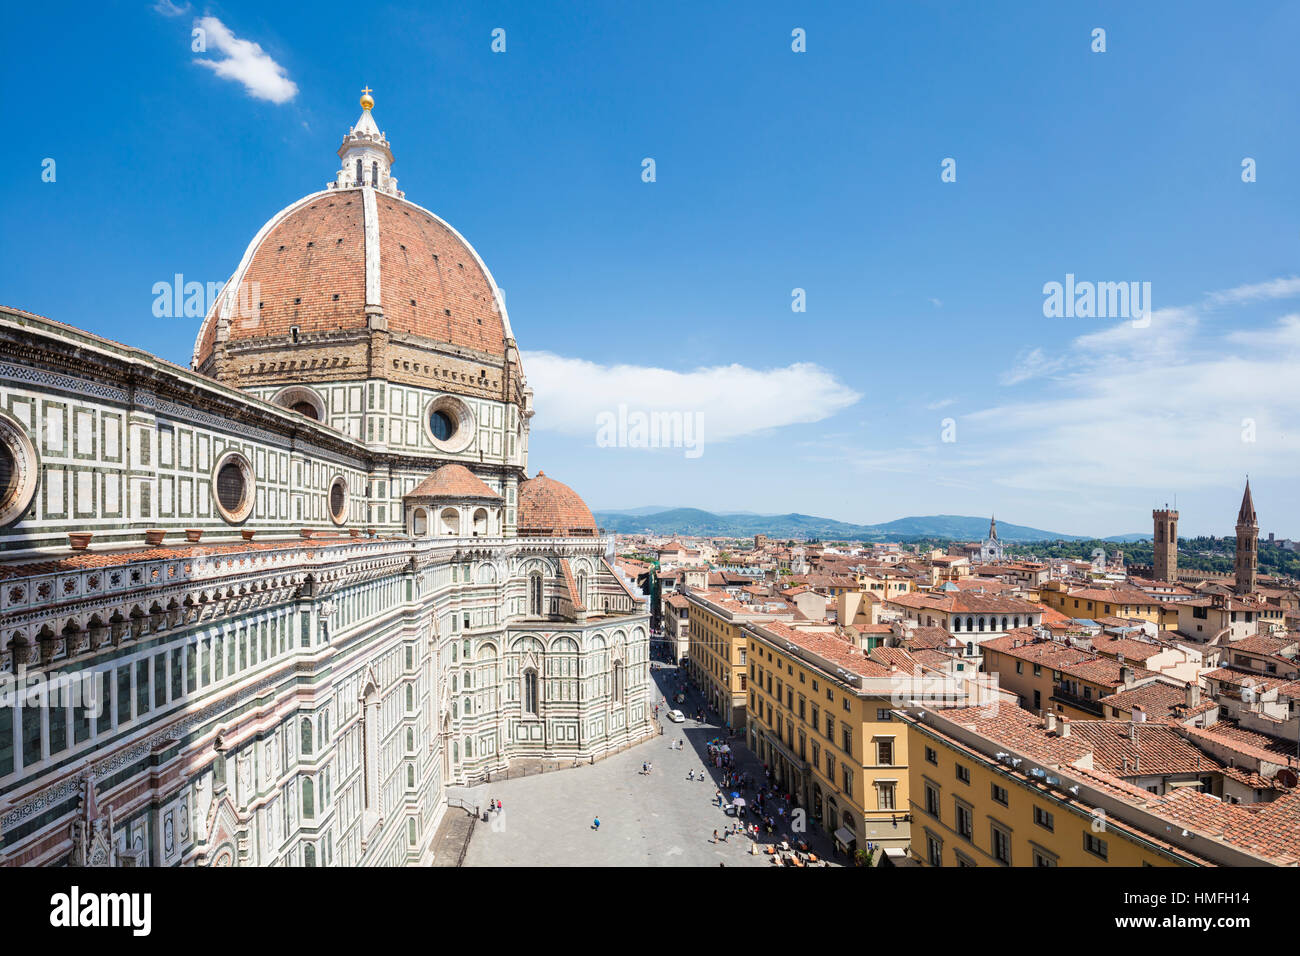 The ancient Duomo di Firenze built with polychrome marble panels and Brunelleschi's Dome, Florence, Tuscany, Italy Stock Photo